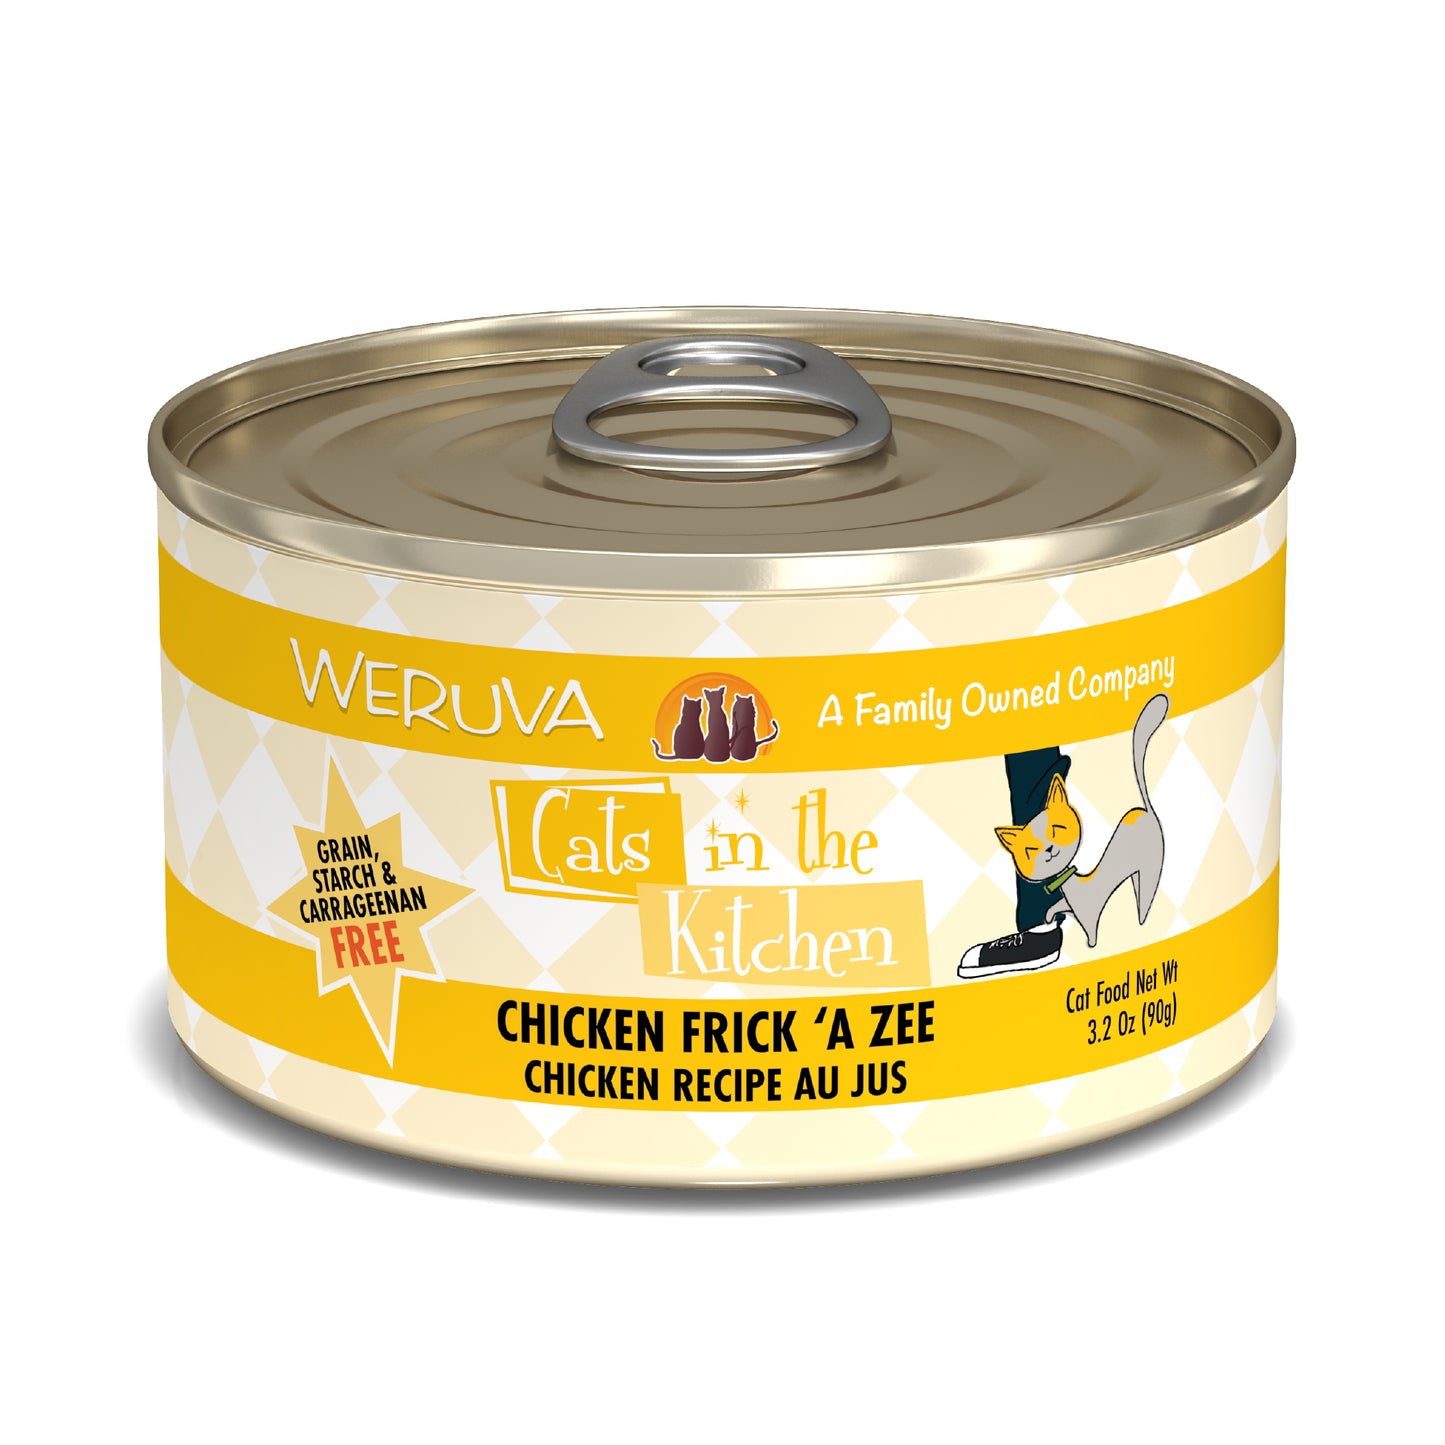 Weruva Cats in the Kitchen 3.2oz Canned Cat Food Chicken Frick A Zee